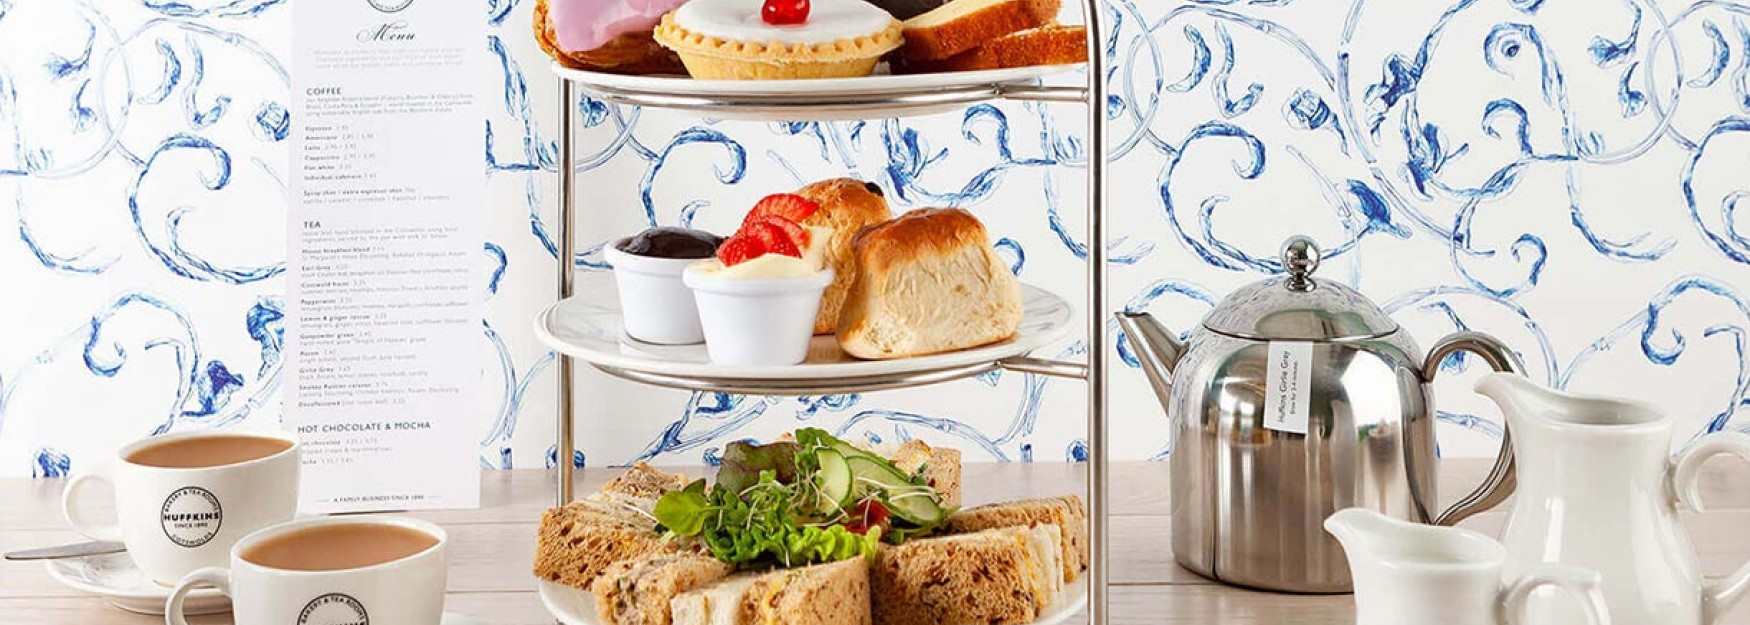 Afternoon tea at Huffkins cafes in Burford and Witney